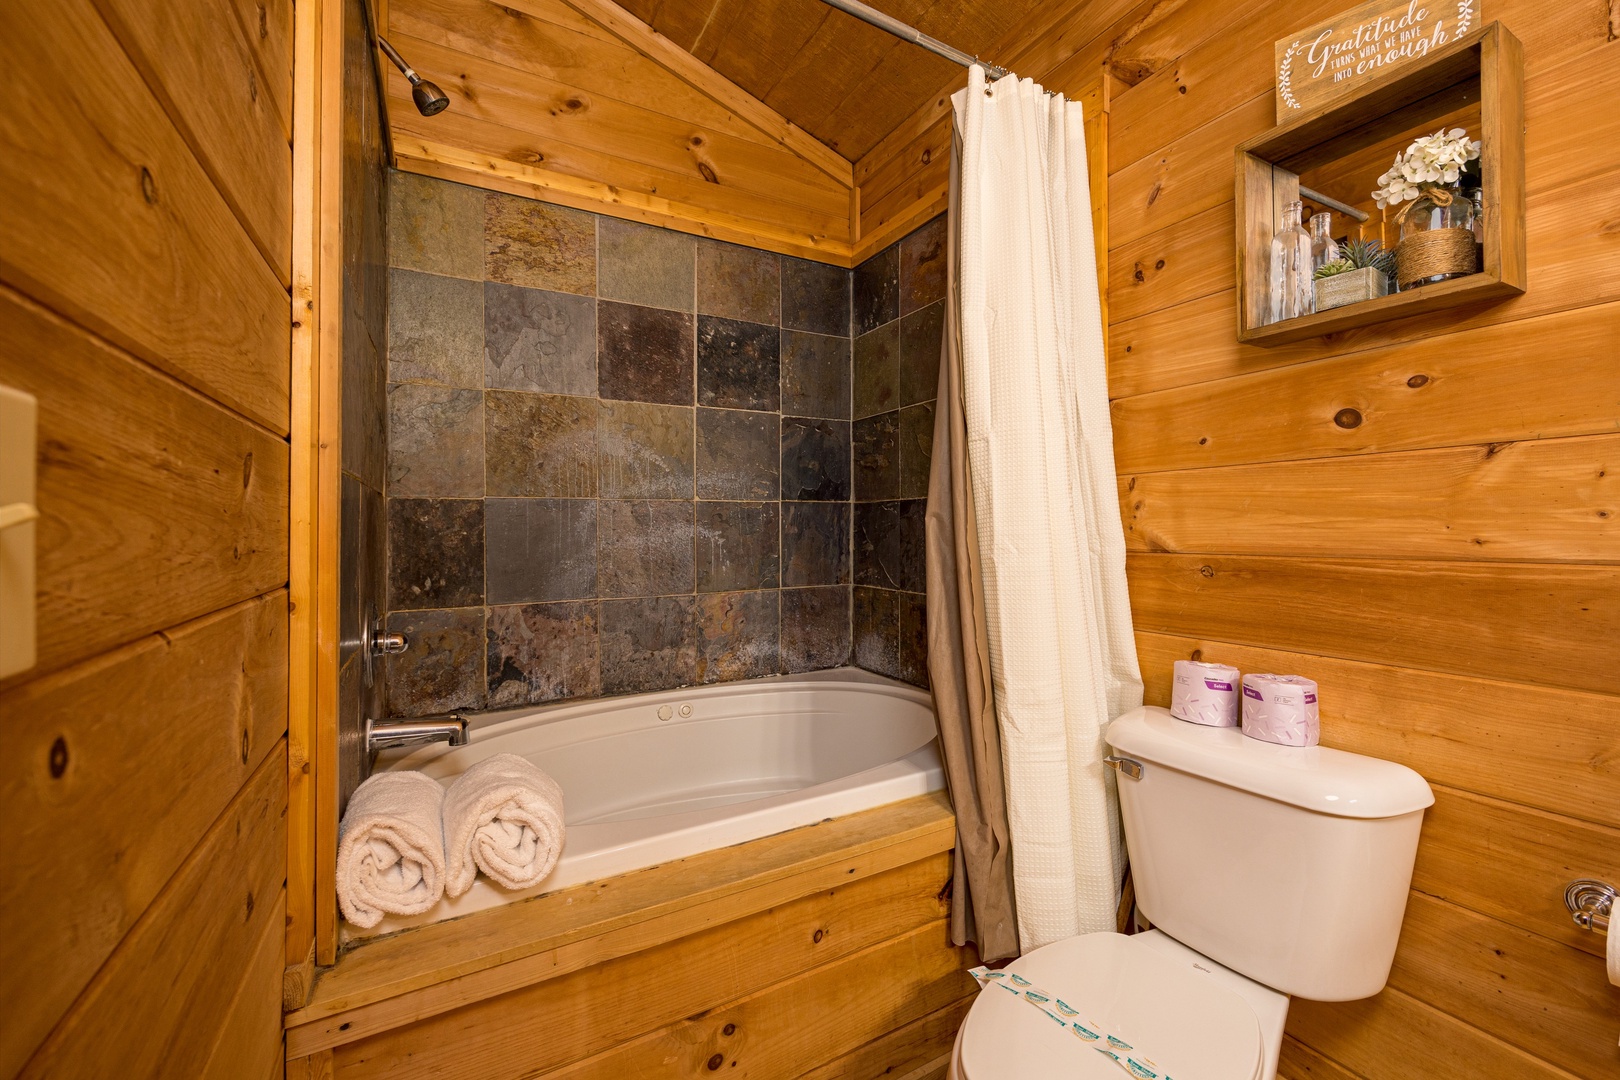 Bathtub and shower at Bearstone Cabin, a 1 bedroom cabin rental located in Gatlinburg